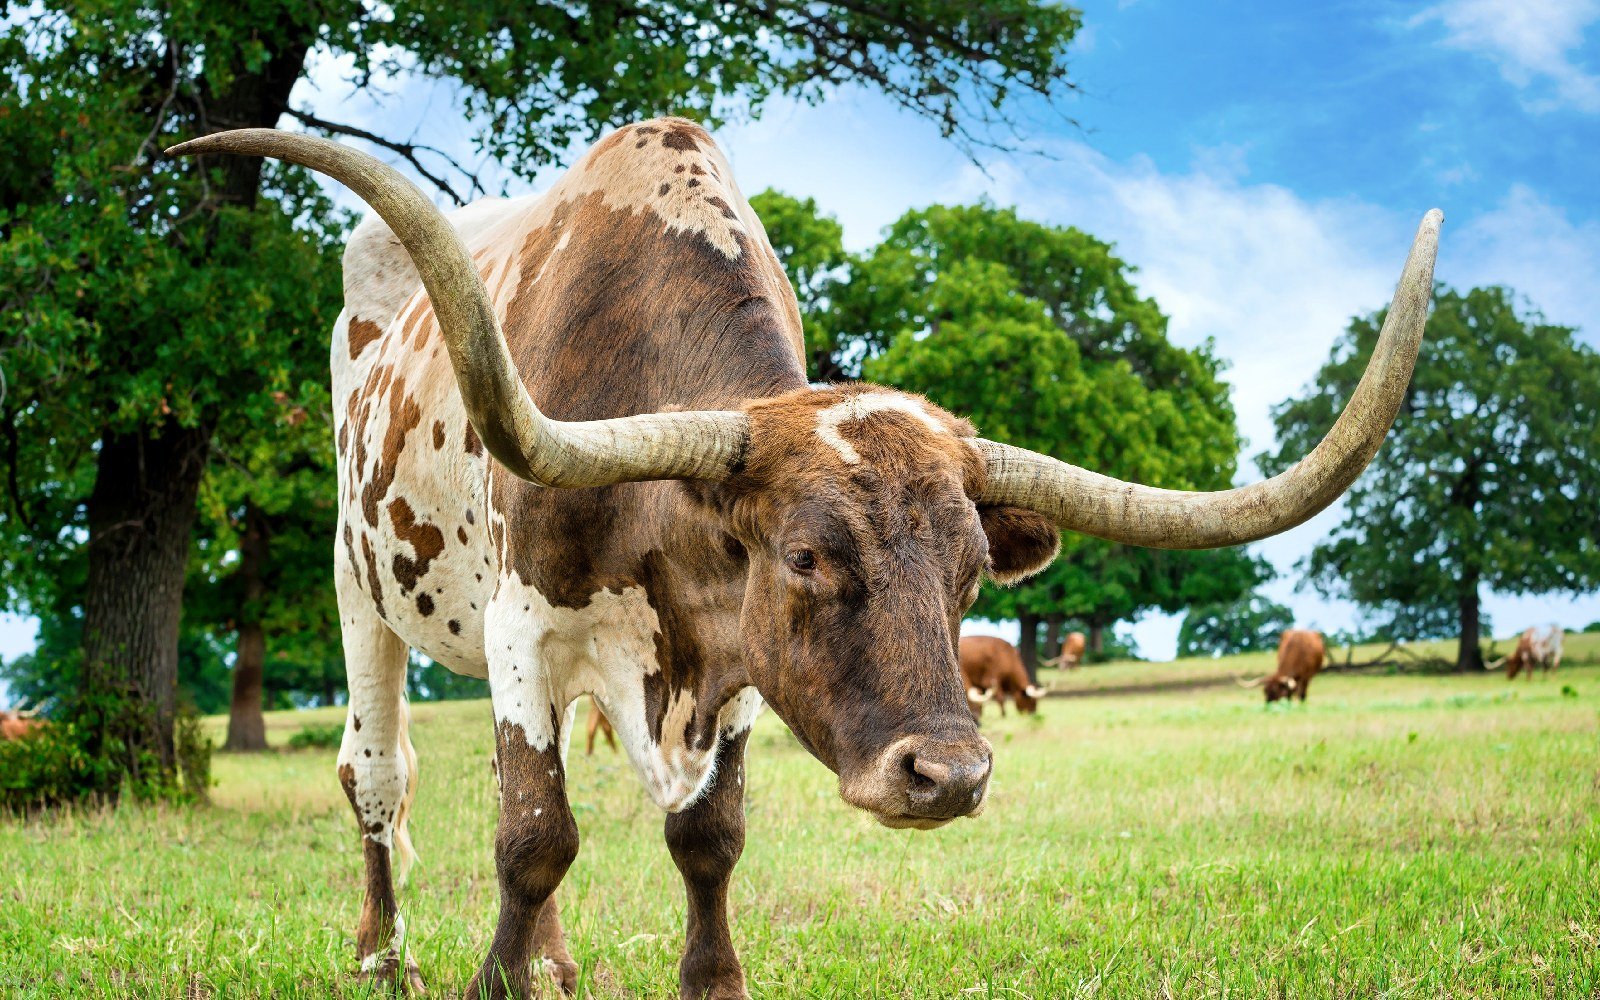 LongHorn Vs. Texas Roadhouse: I See Why the Younger Brand Is More